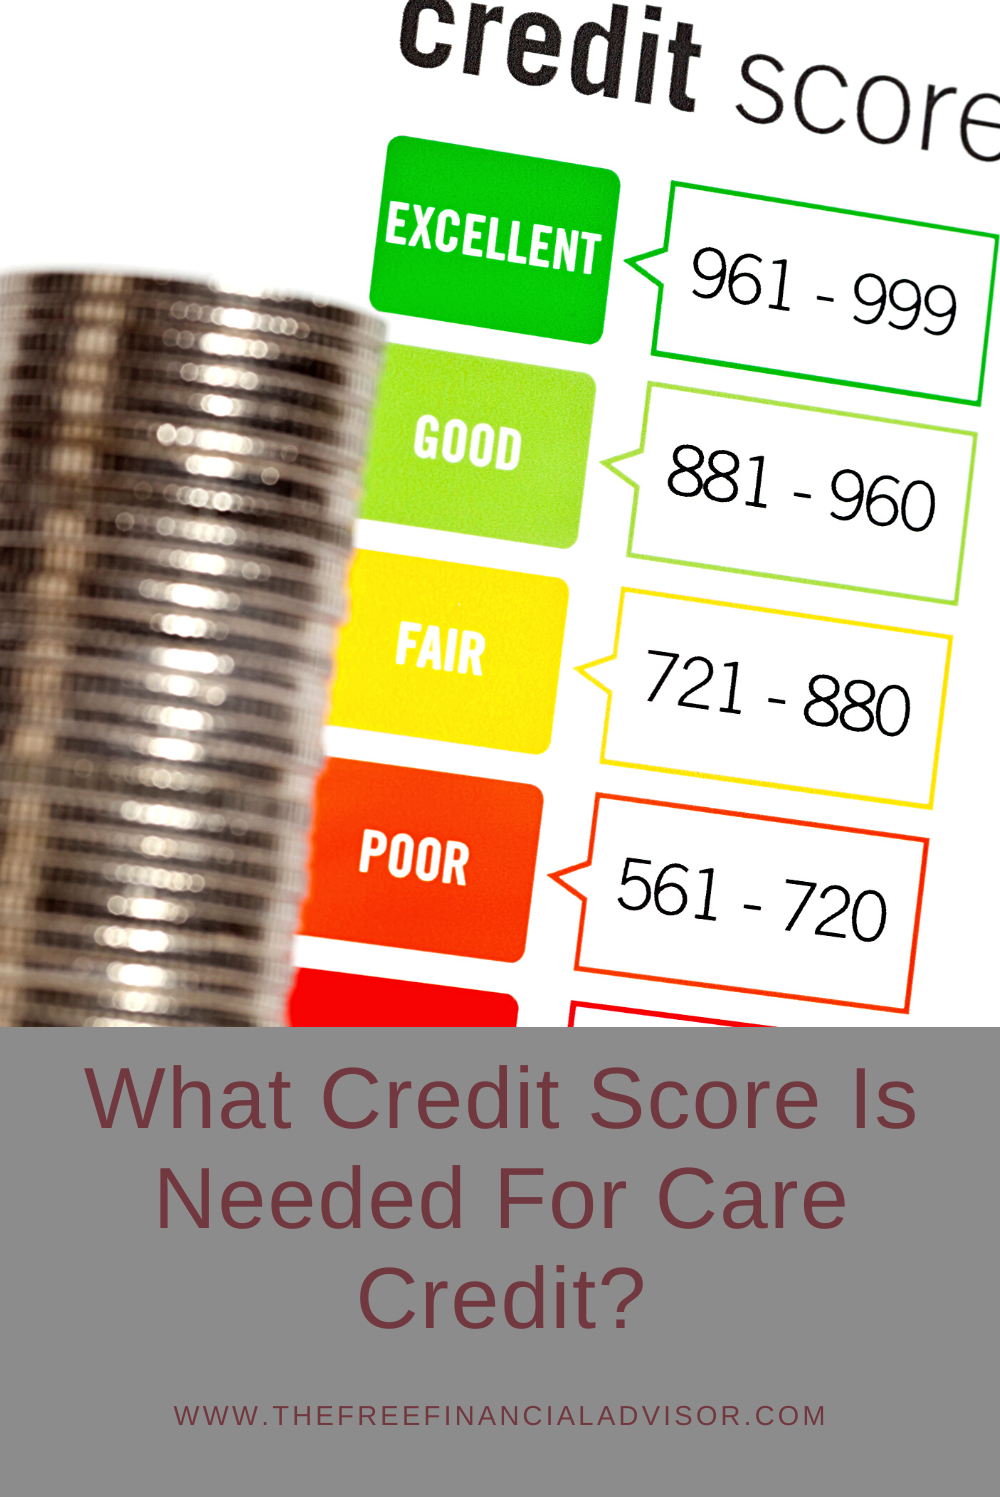 What Credit Score Is Needed For Care Credit